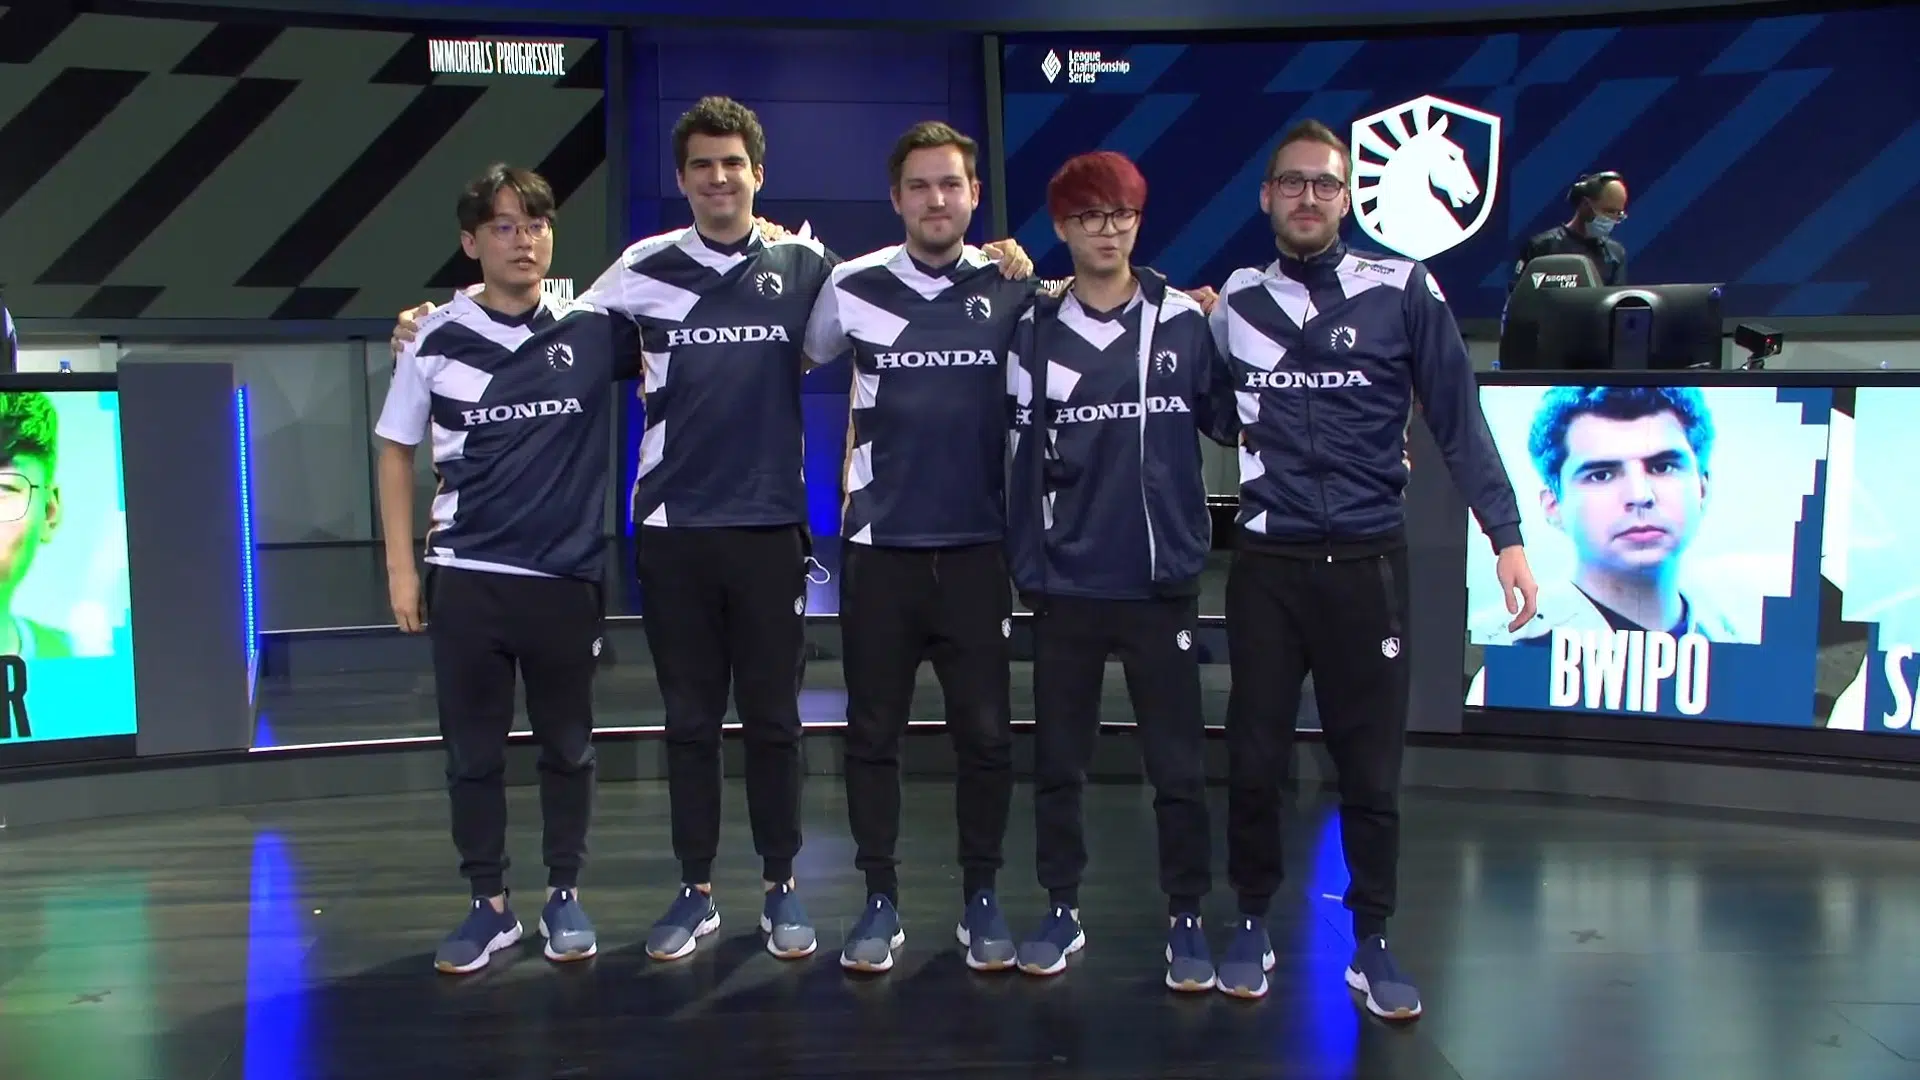 CSGO – Team Liquid Goes To Semi-Finals by Defeating NaVi